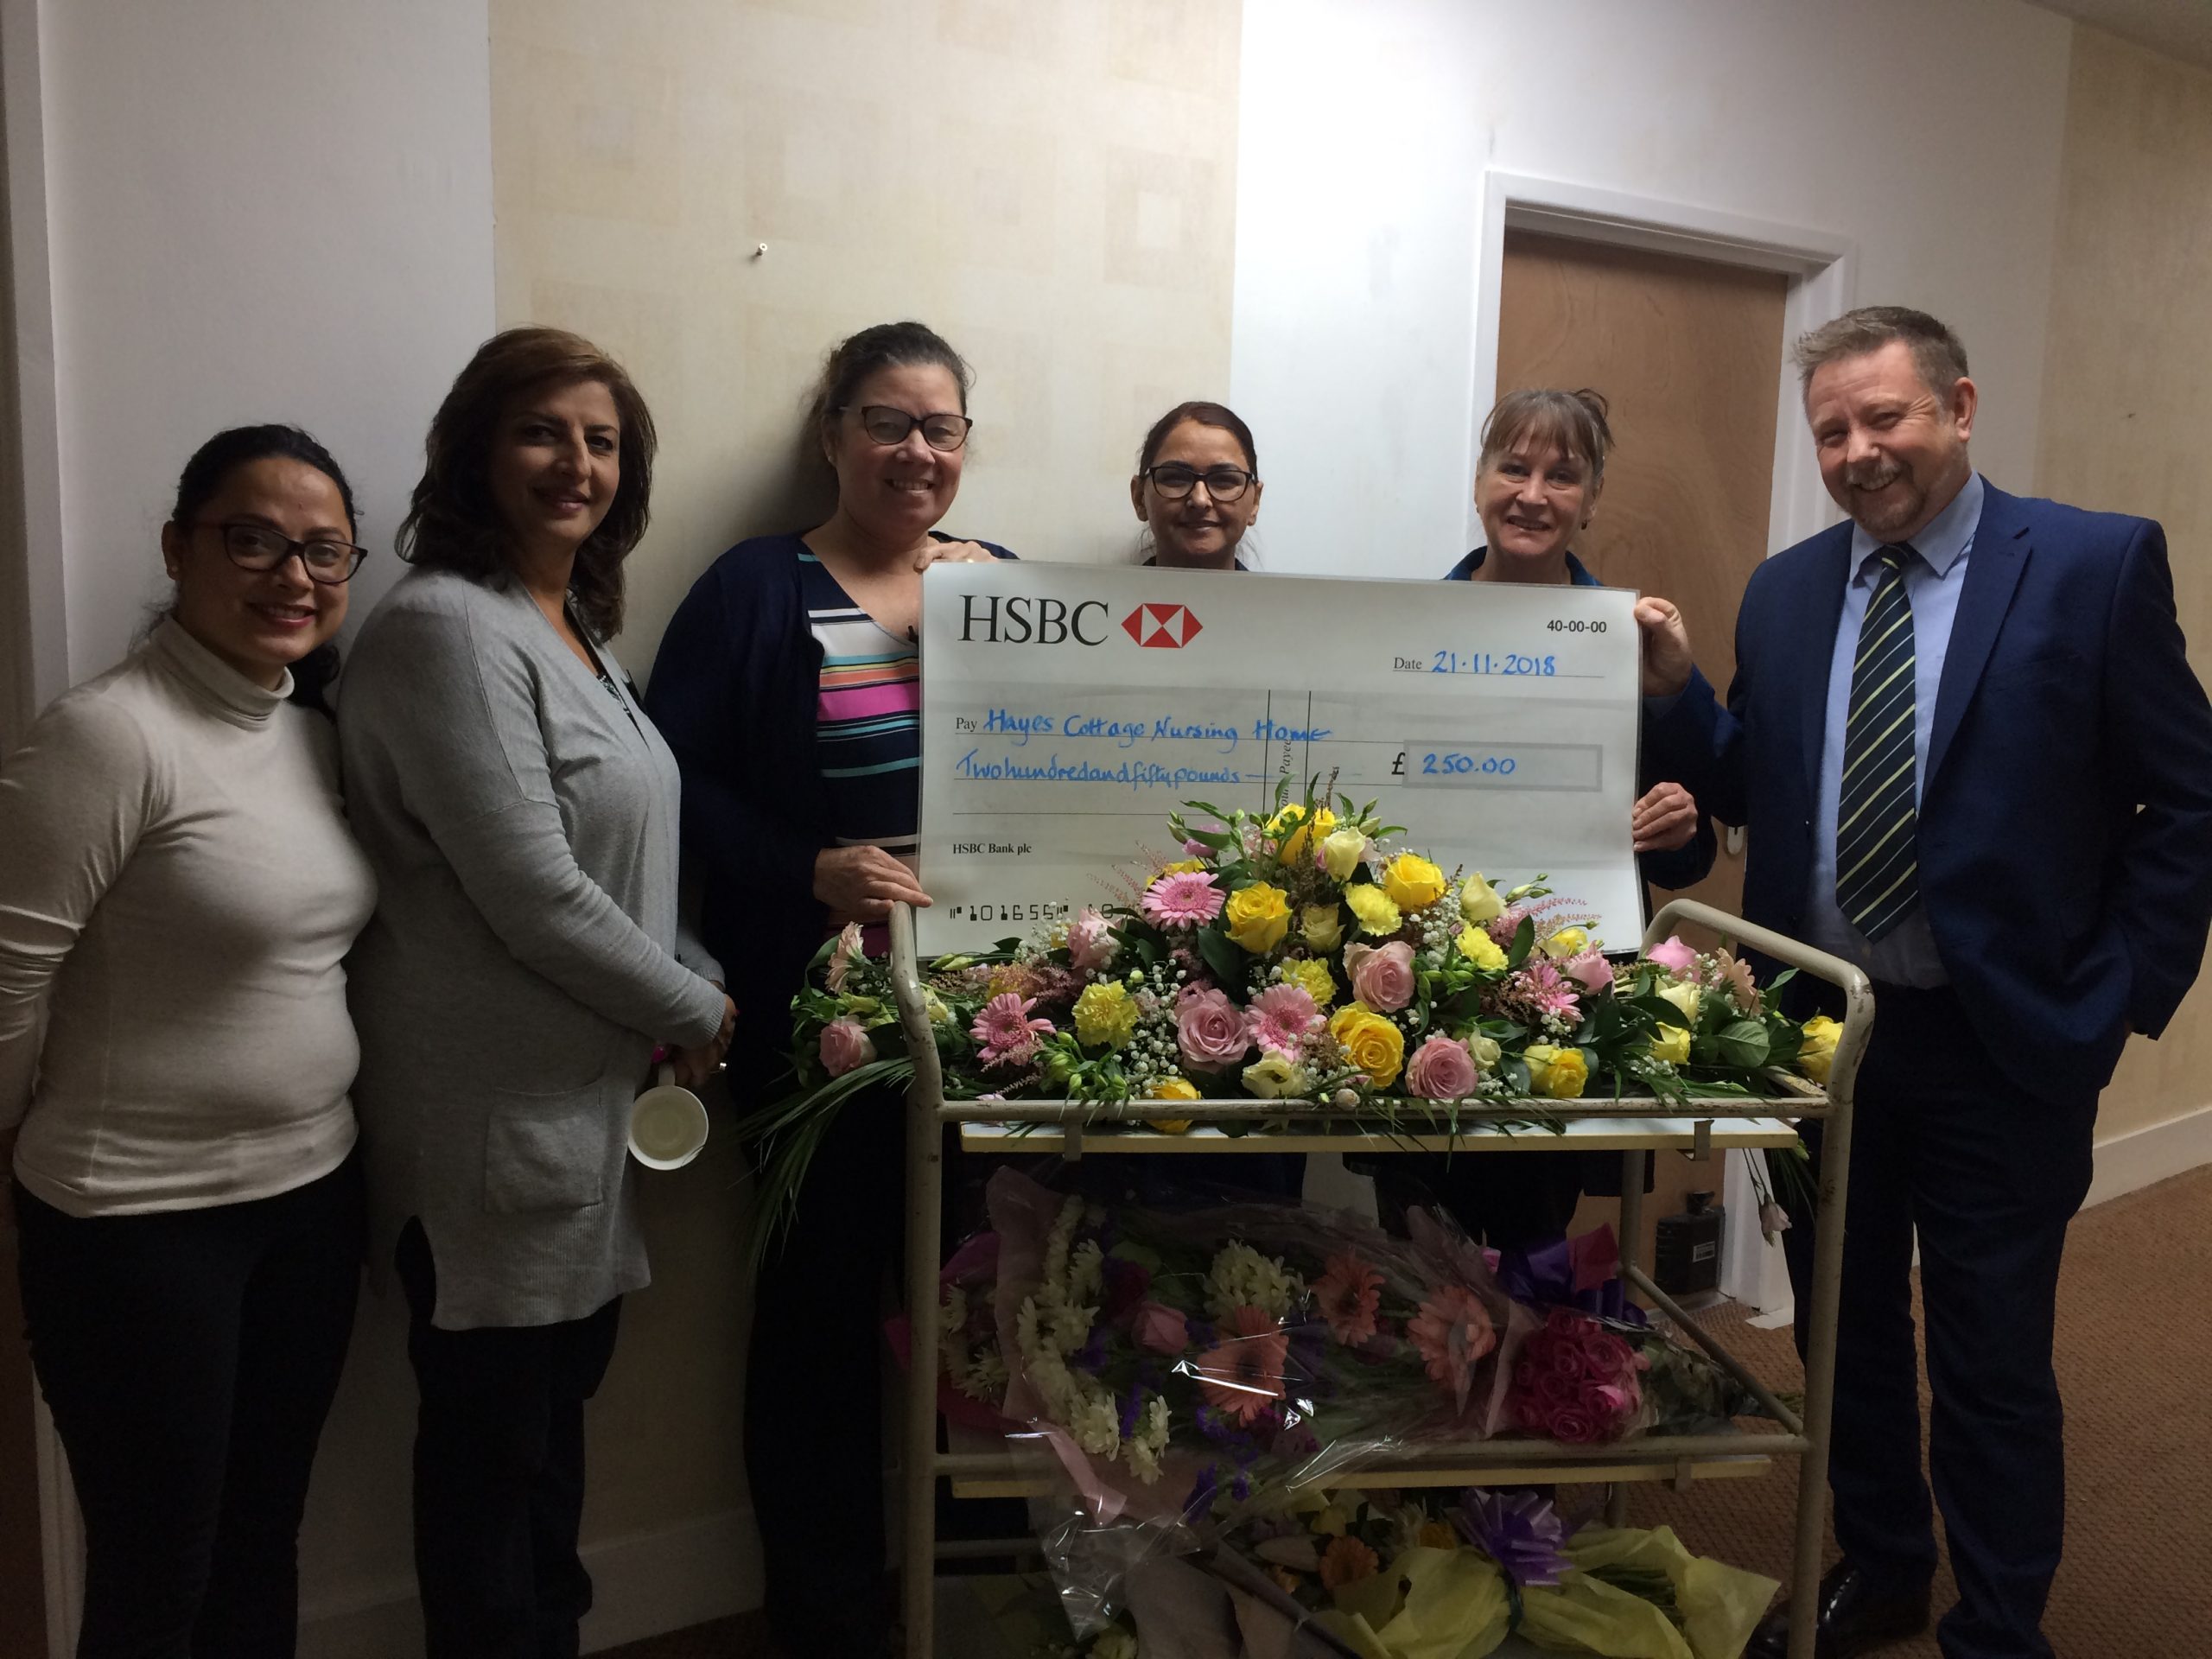 Walding & Son Donate to Hayes Cottage Nursing Home